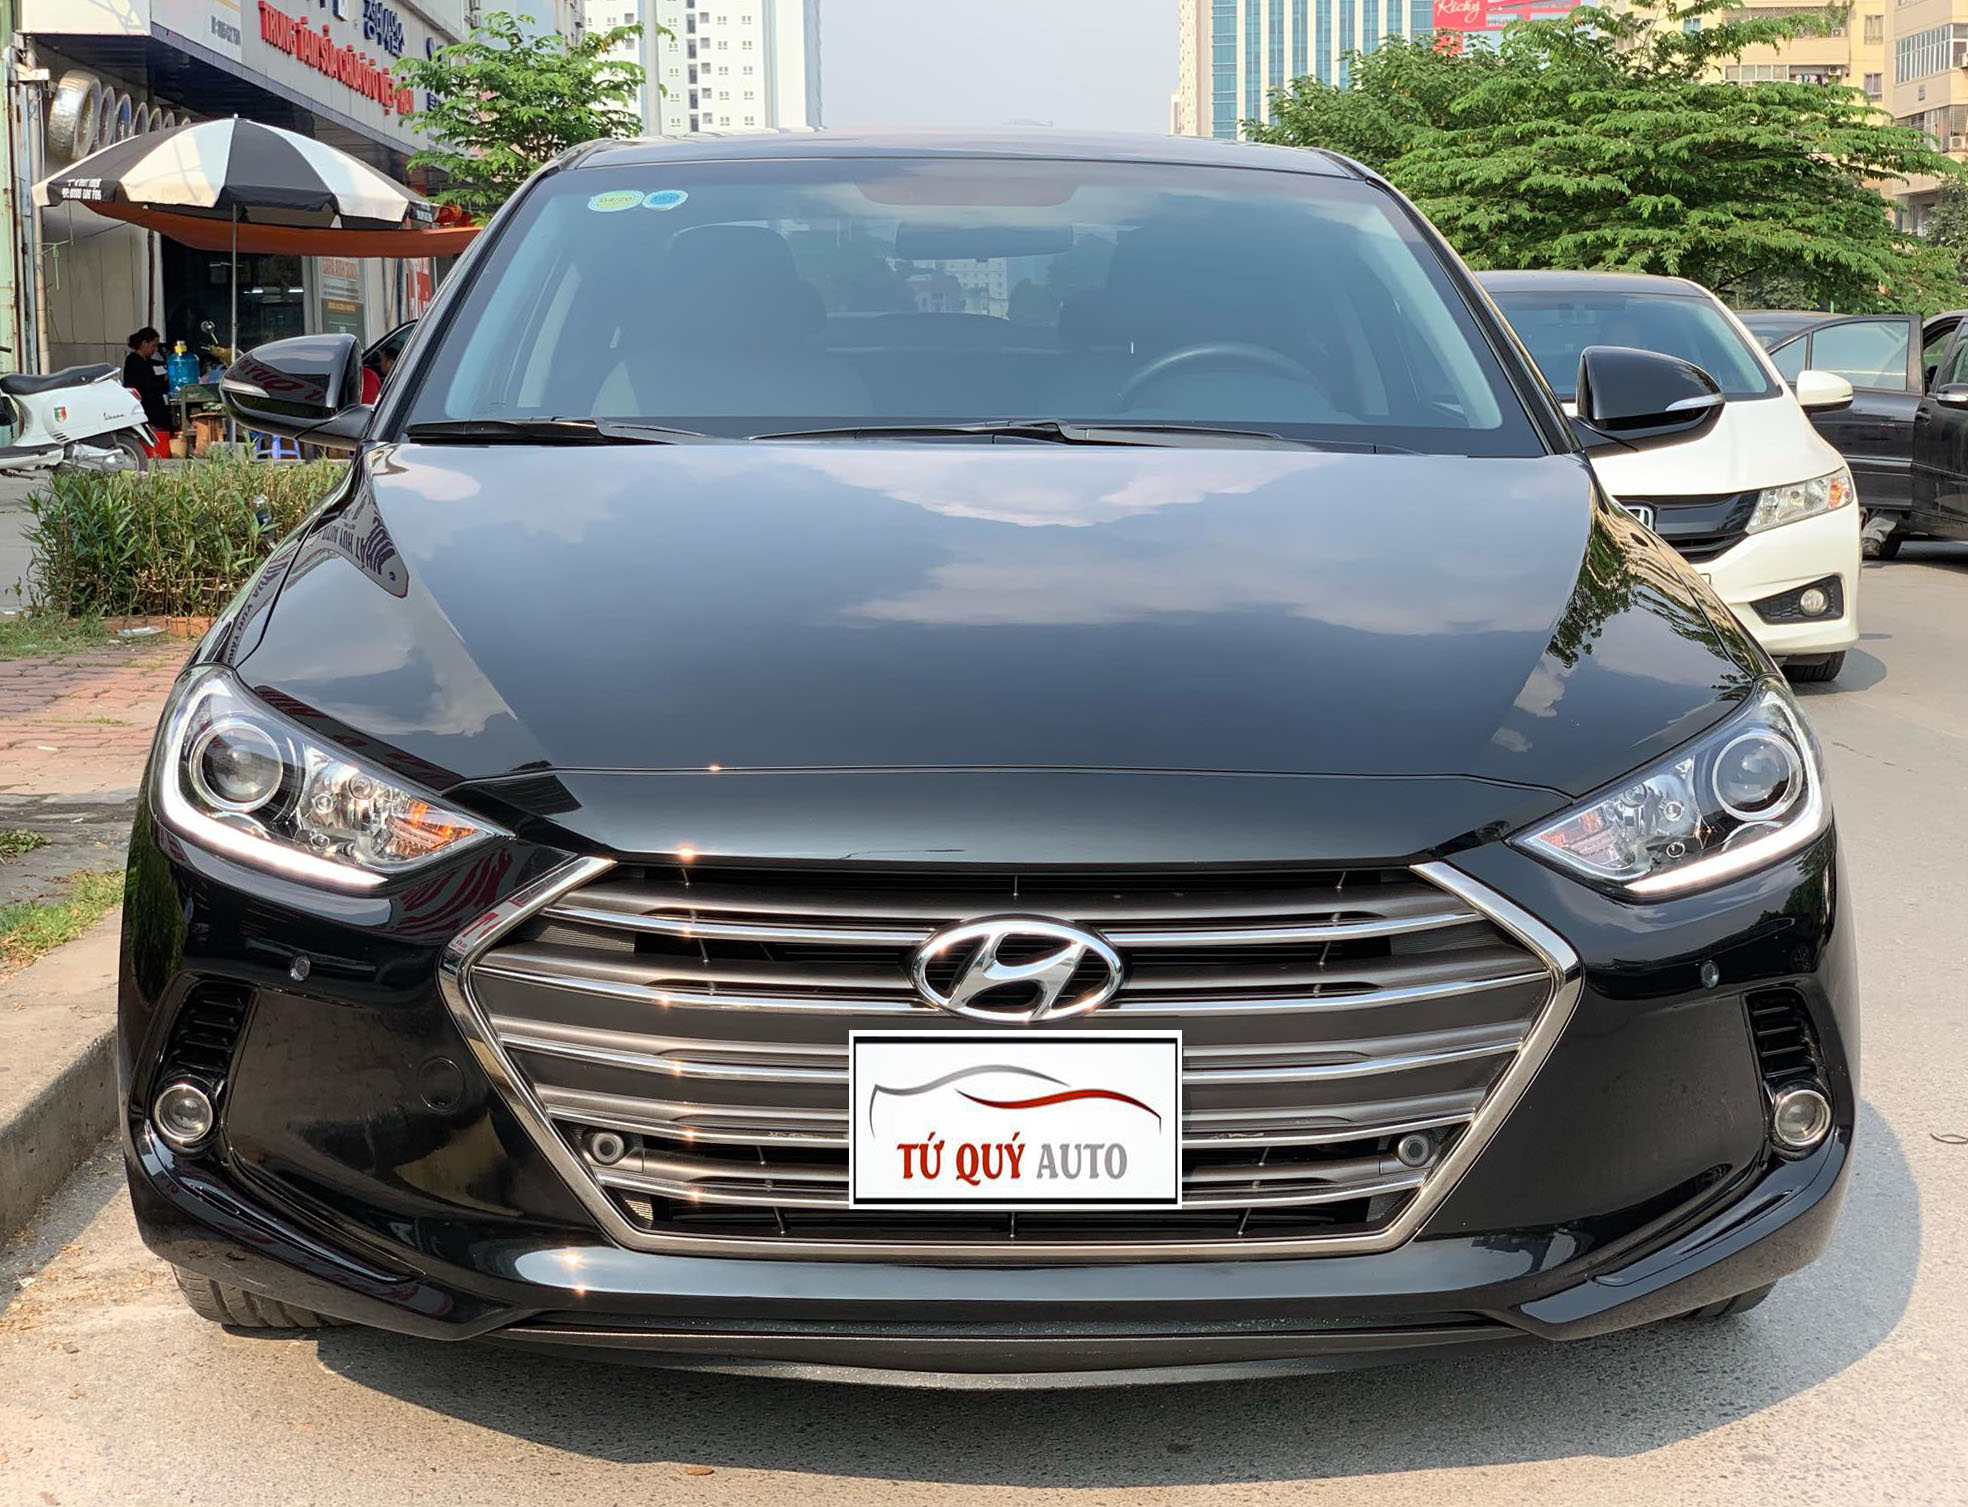 AllNew 2017 Hyundai Elantra Launches With Apple CarPlay And Android Auto